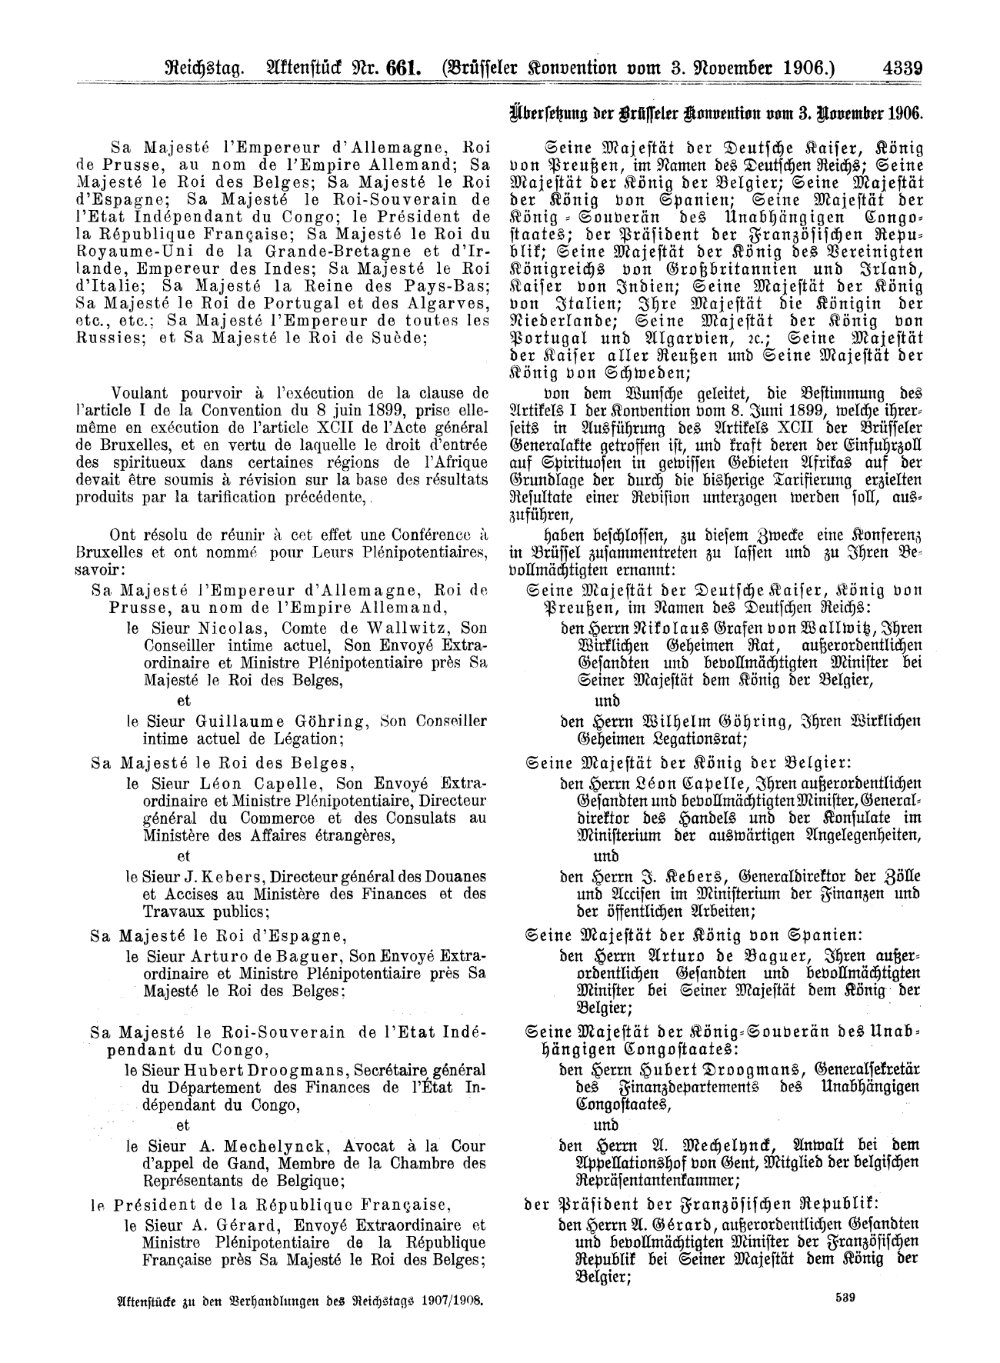 Scan of page 4339